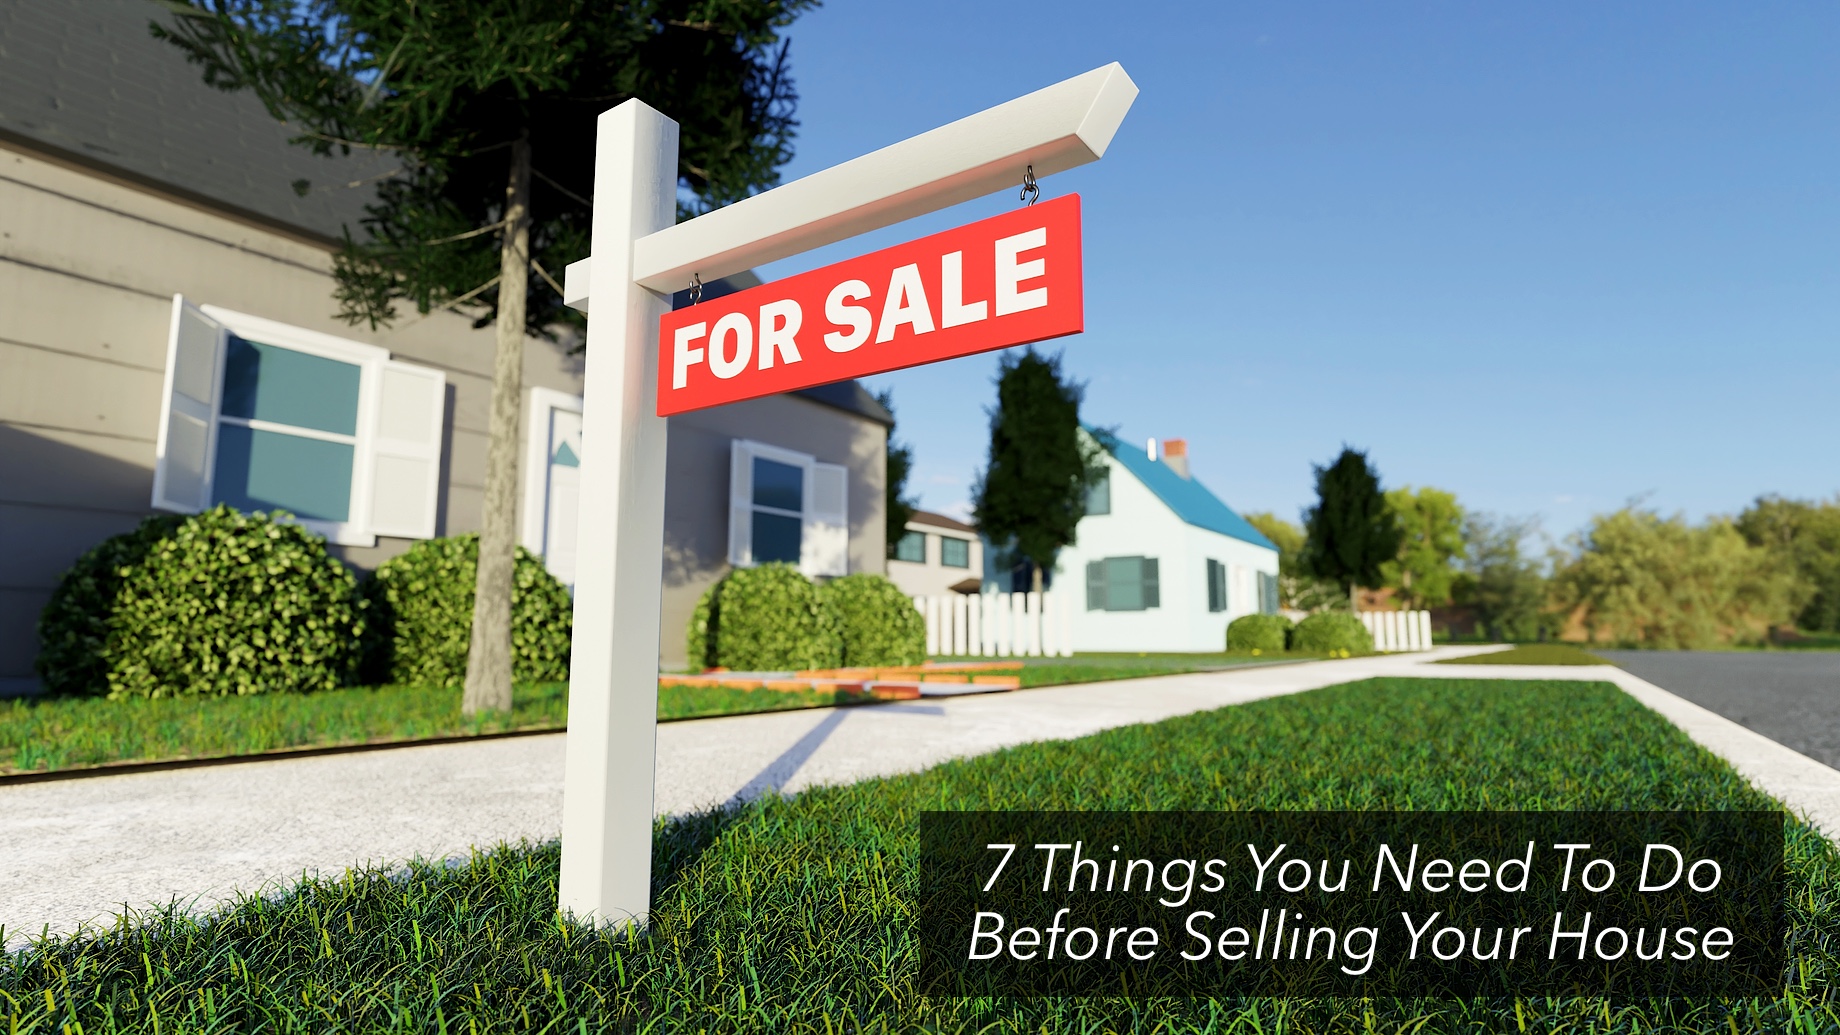 7 Things You Need To Do Before Selling Your House